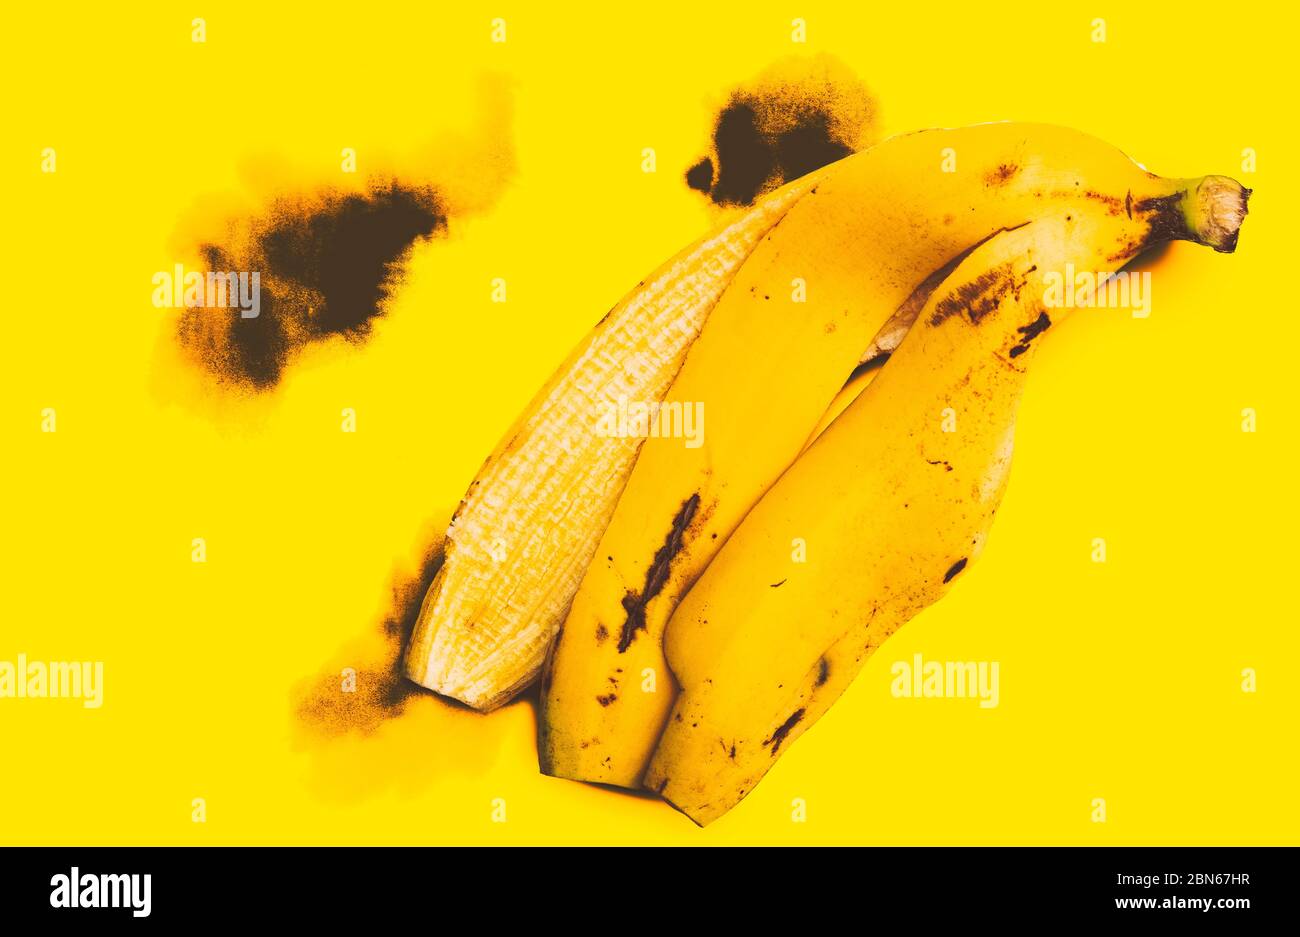 Flat lay template design, Peel big banana on the yellow stained paper, like black burns. The image has been adjusted to a bright yellow. Top view imag Stock Photo